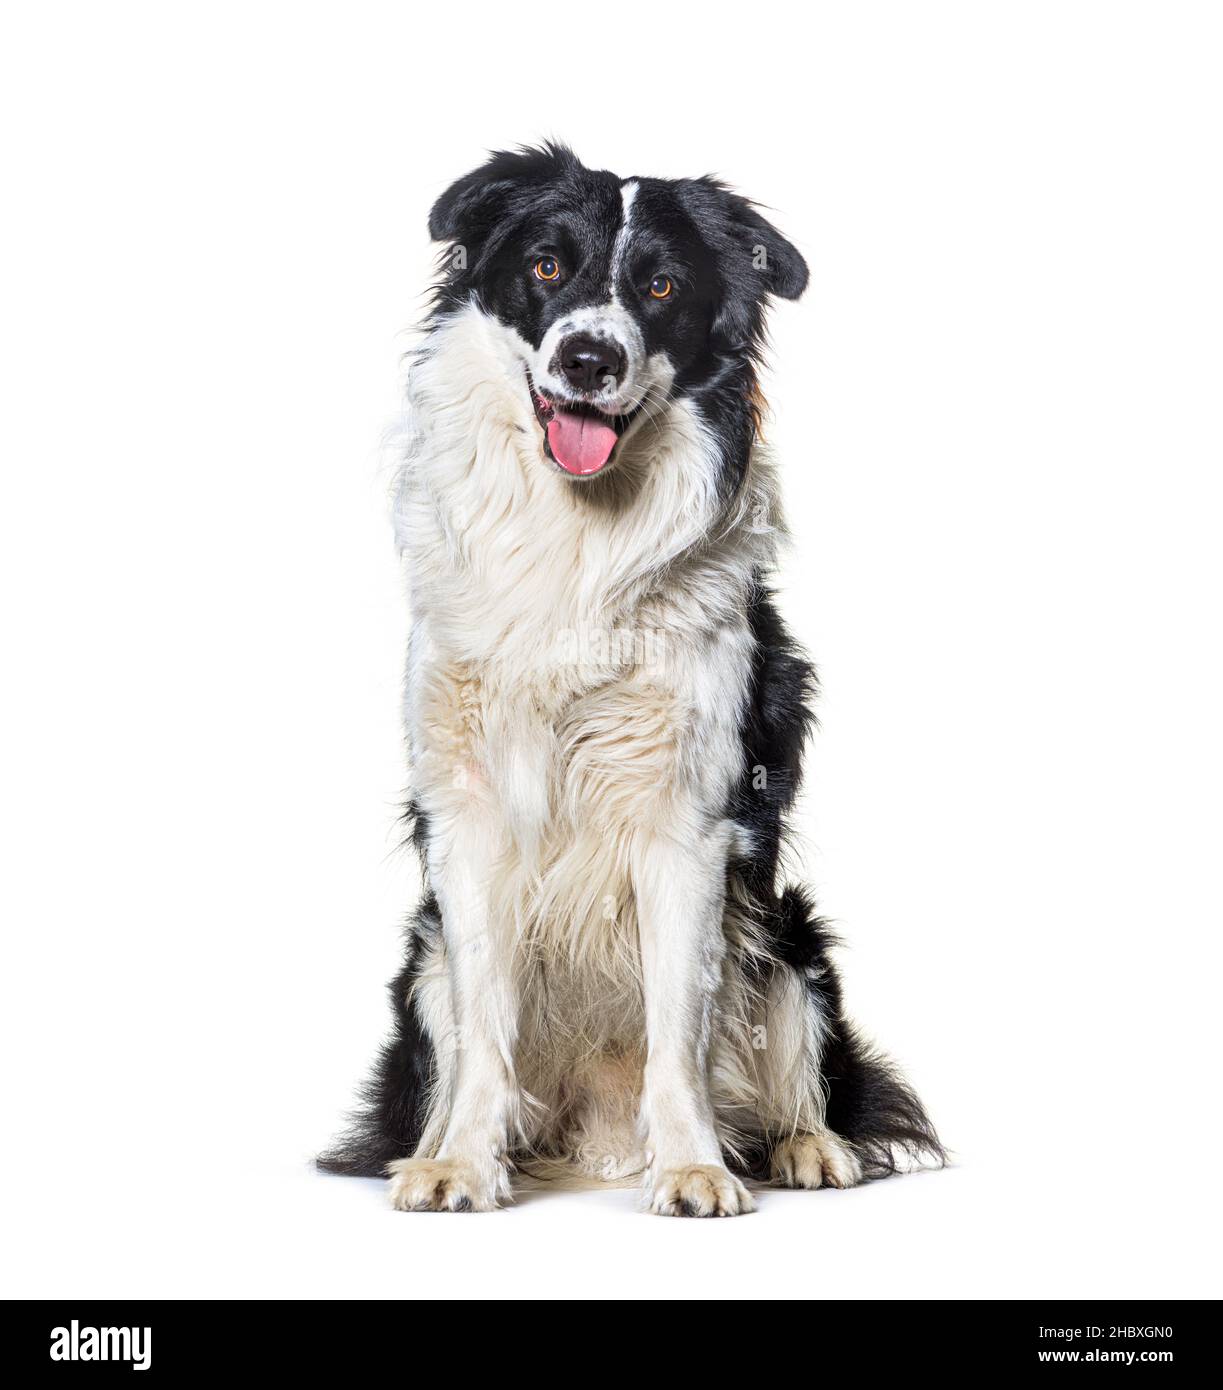 Panting black and white border collie dog portrait posing sitting in front, isolated on white Stock Photo